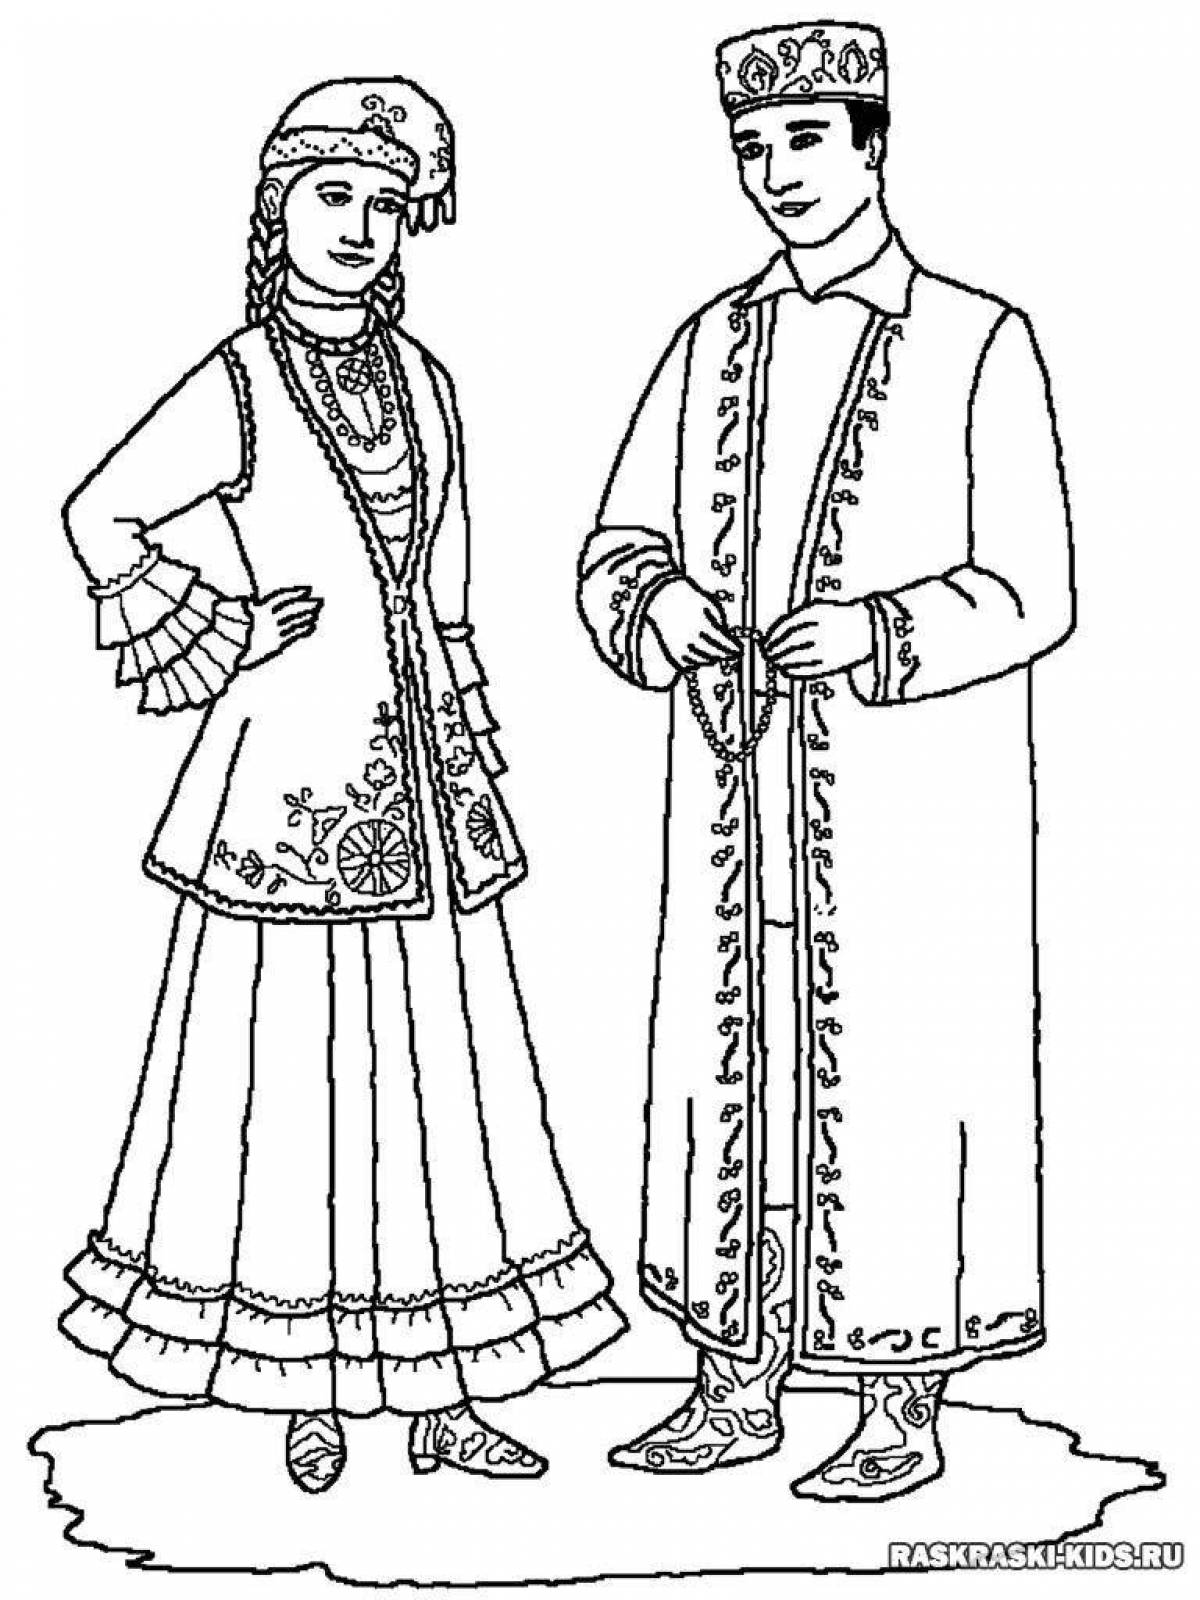 Costumes of the peoples of Russia #9